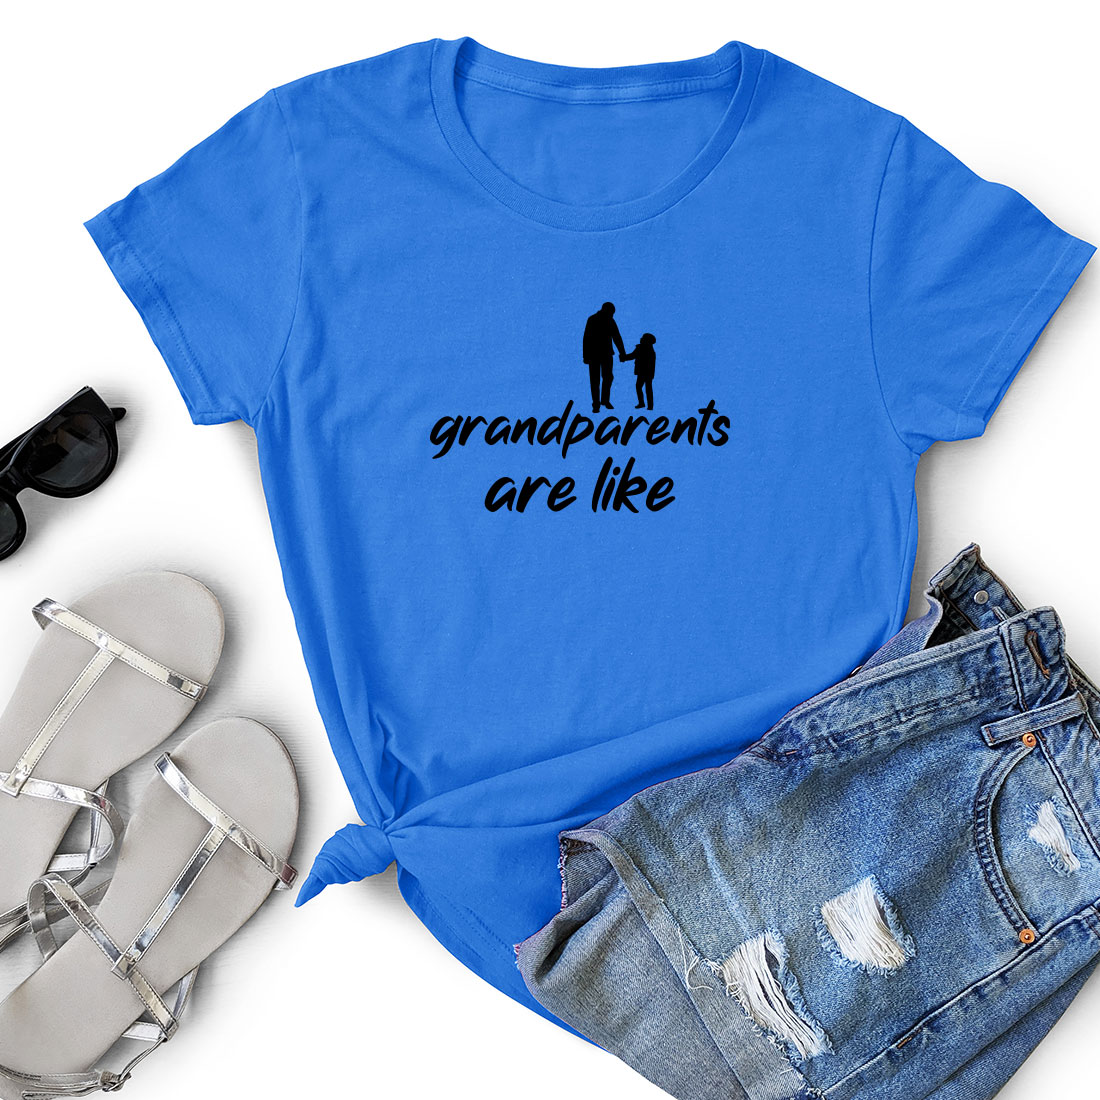 Blue shirt that says grandparents are like.